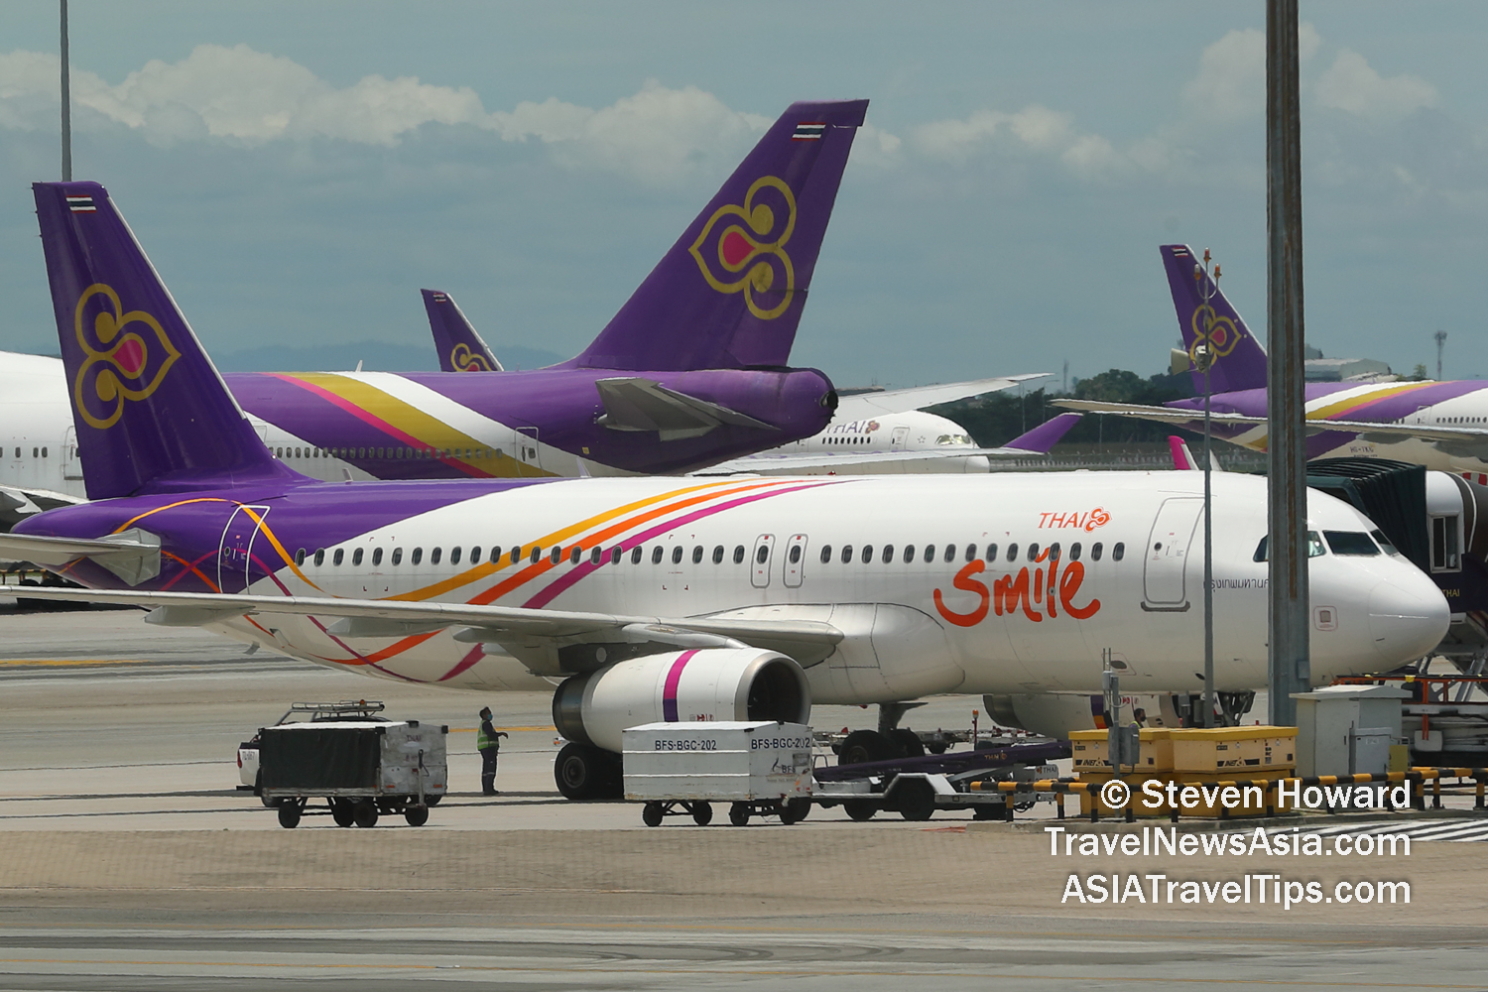 Thai Airways and Thai Smile planes at BKK. Picture by Steven Howard of TravelNewsAsia.com Click to enlarge.